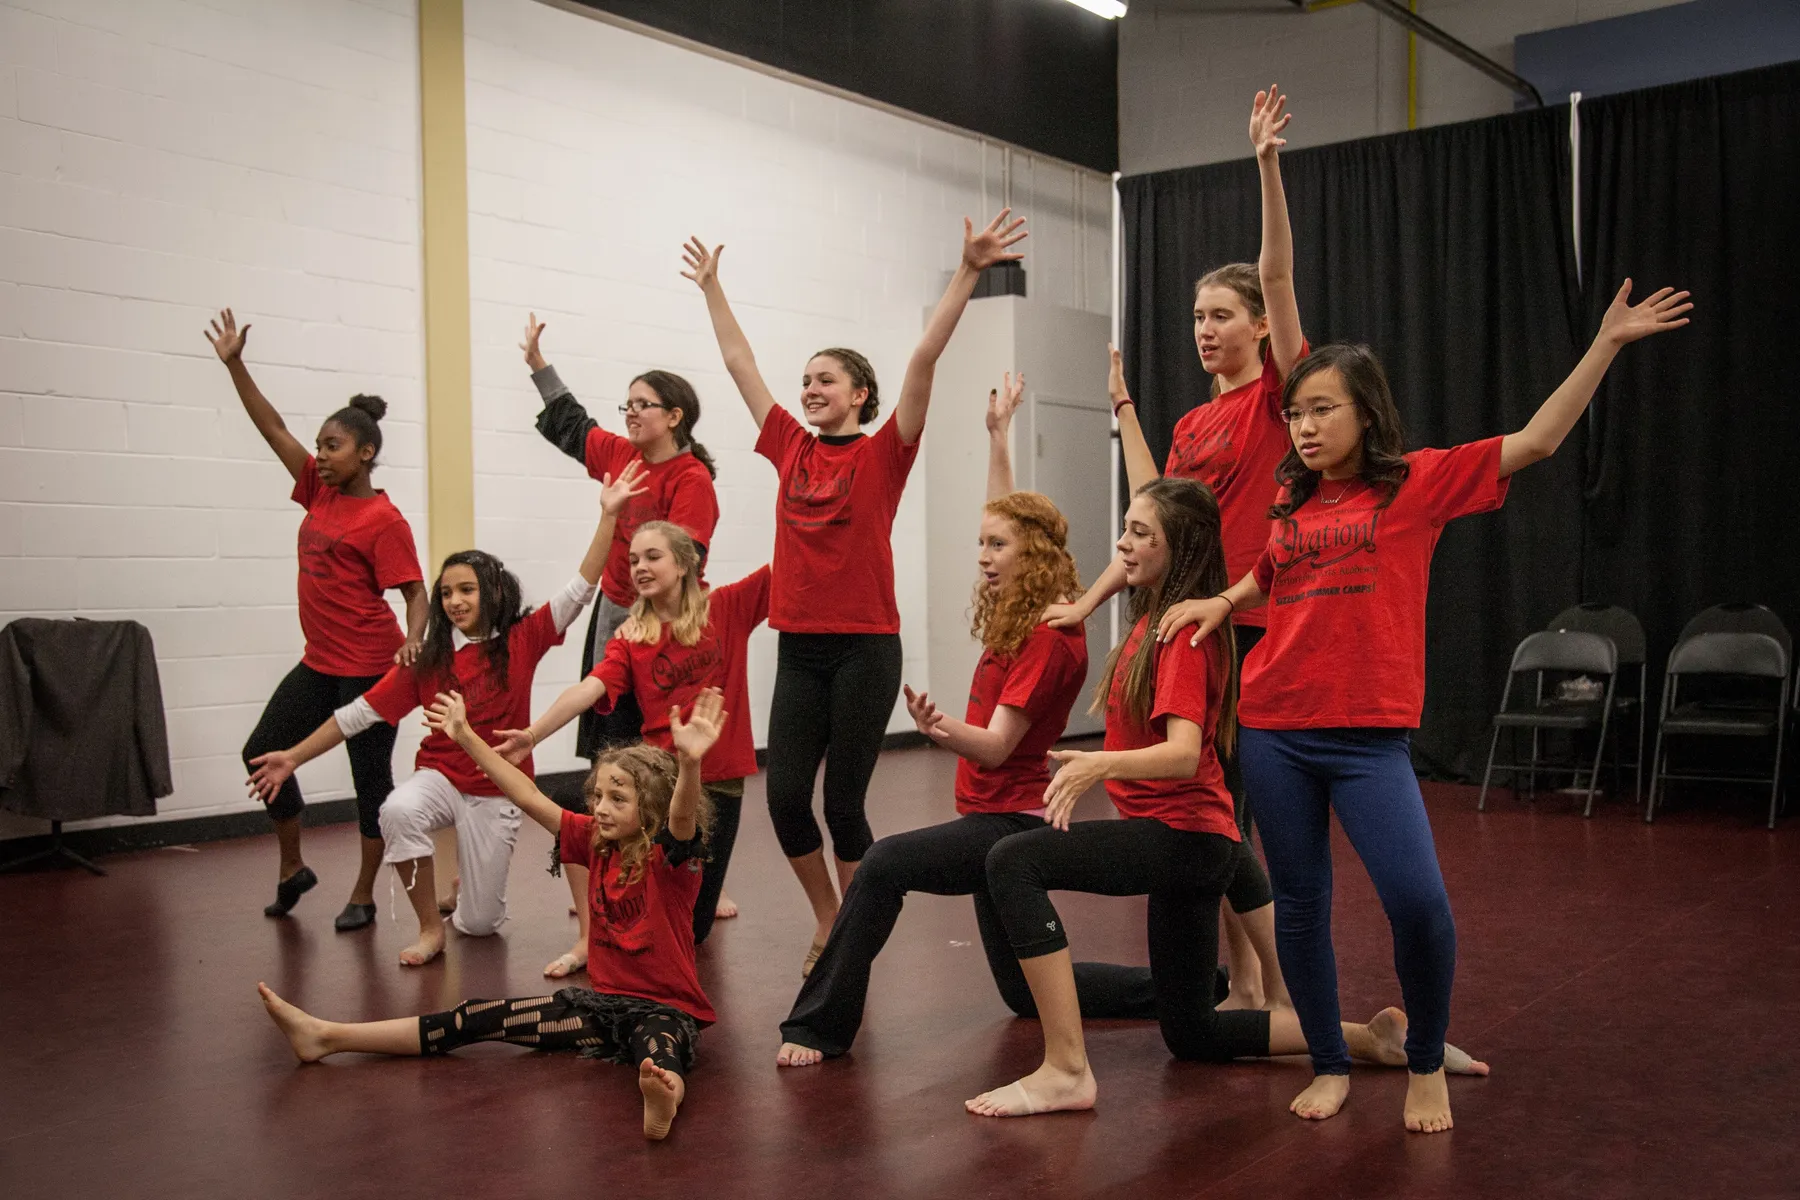 Students at a musical theatre summer camp